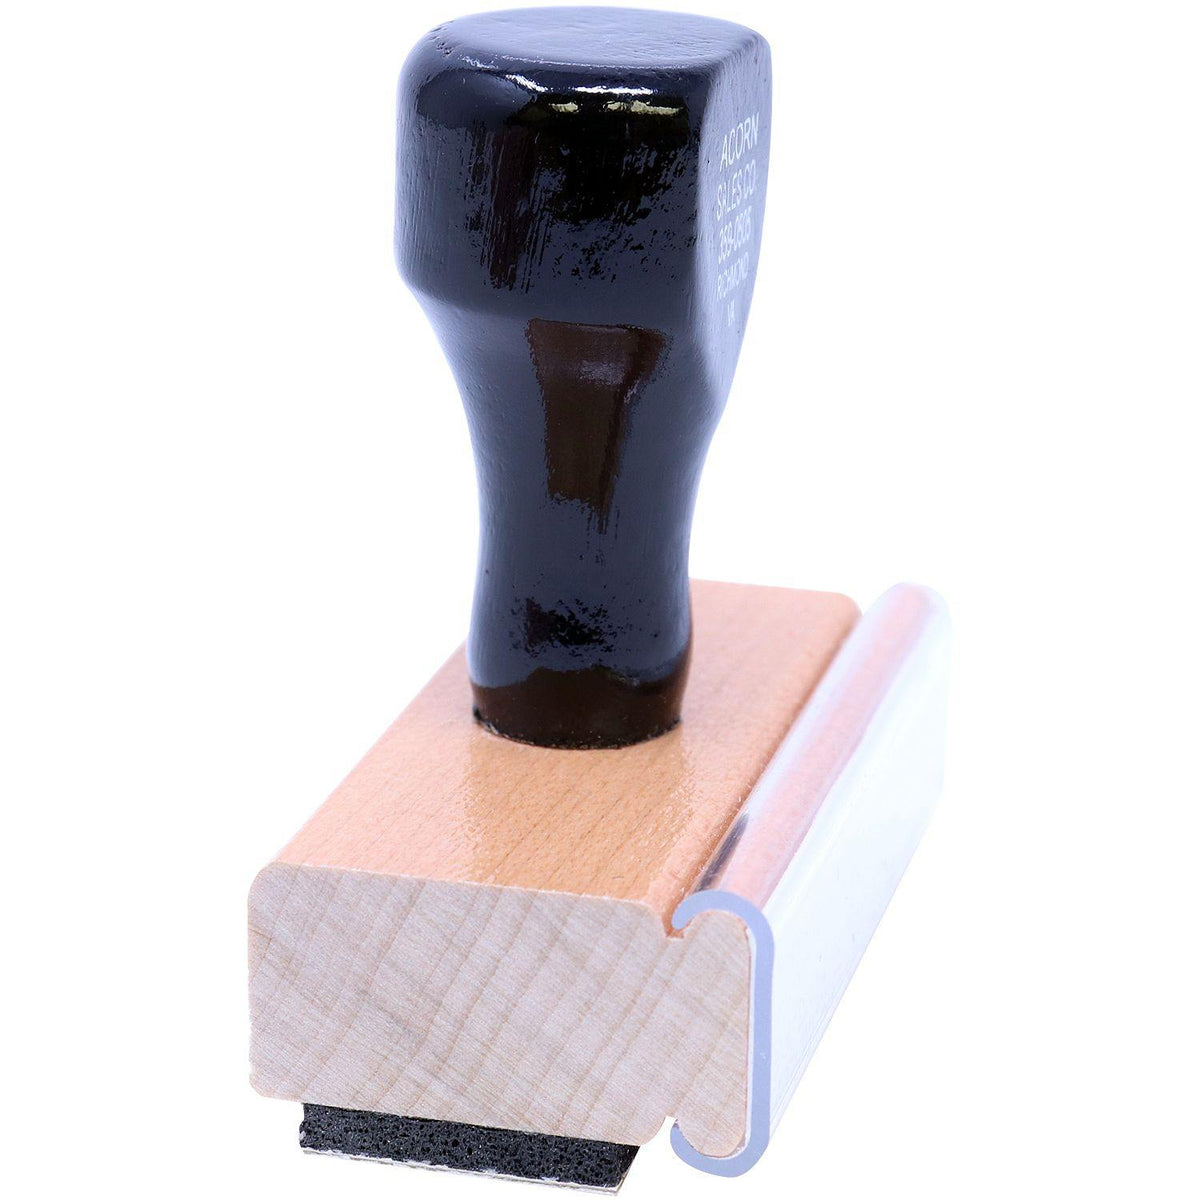 Side View of Bold Covid-19 Rubber Stamp at an Angle